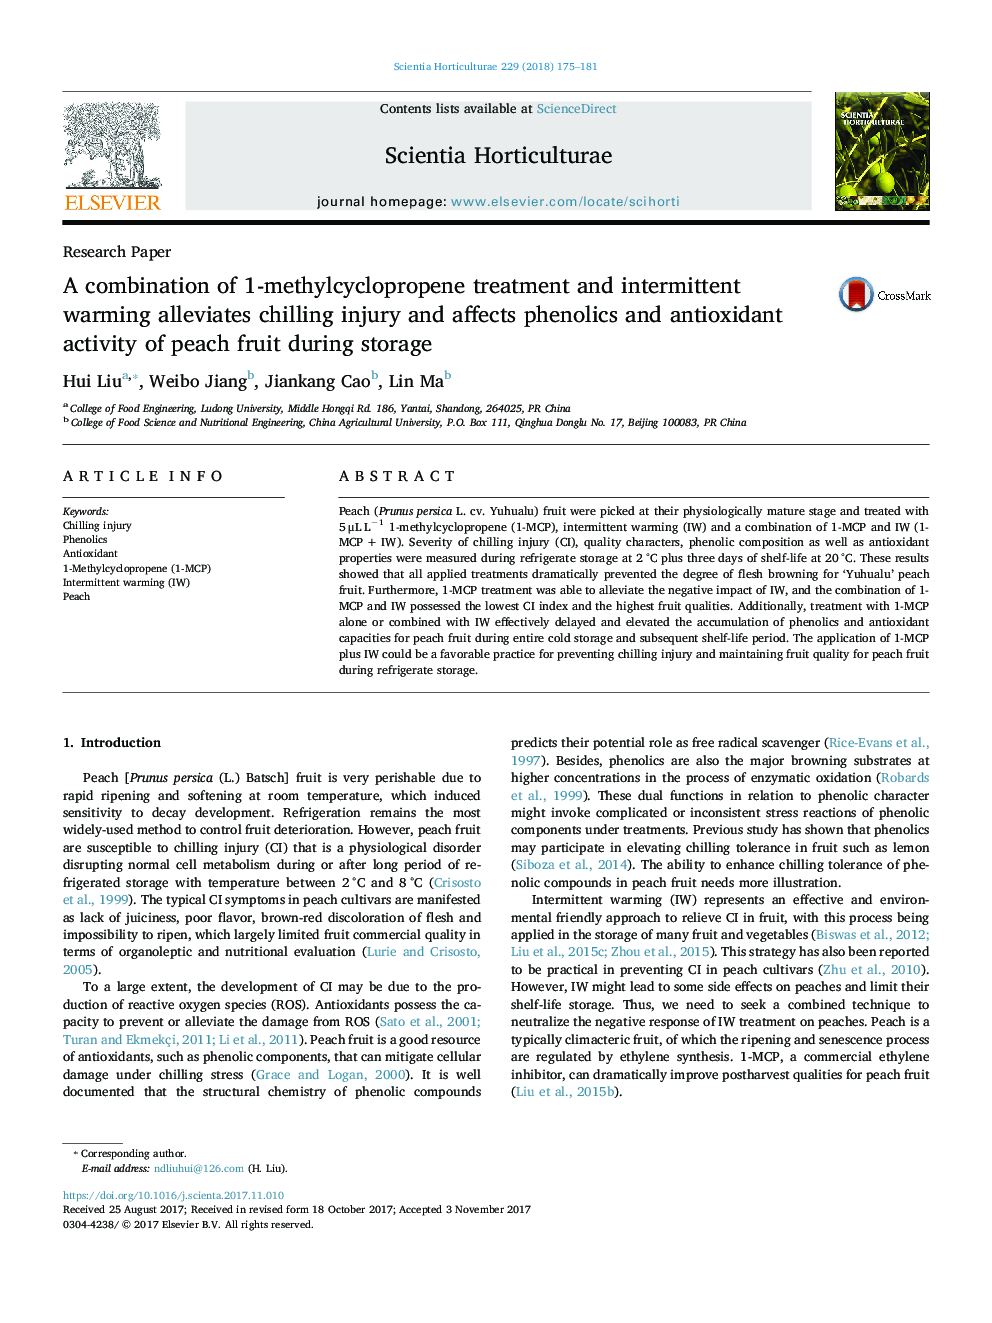 A combination of 1-methylcyclopropene treatment and intermittent warming alleviates chilling injury and affects phenolics and antioxidant activity of peach fruit during storage